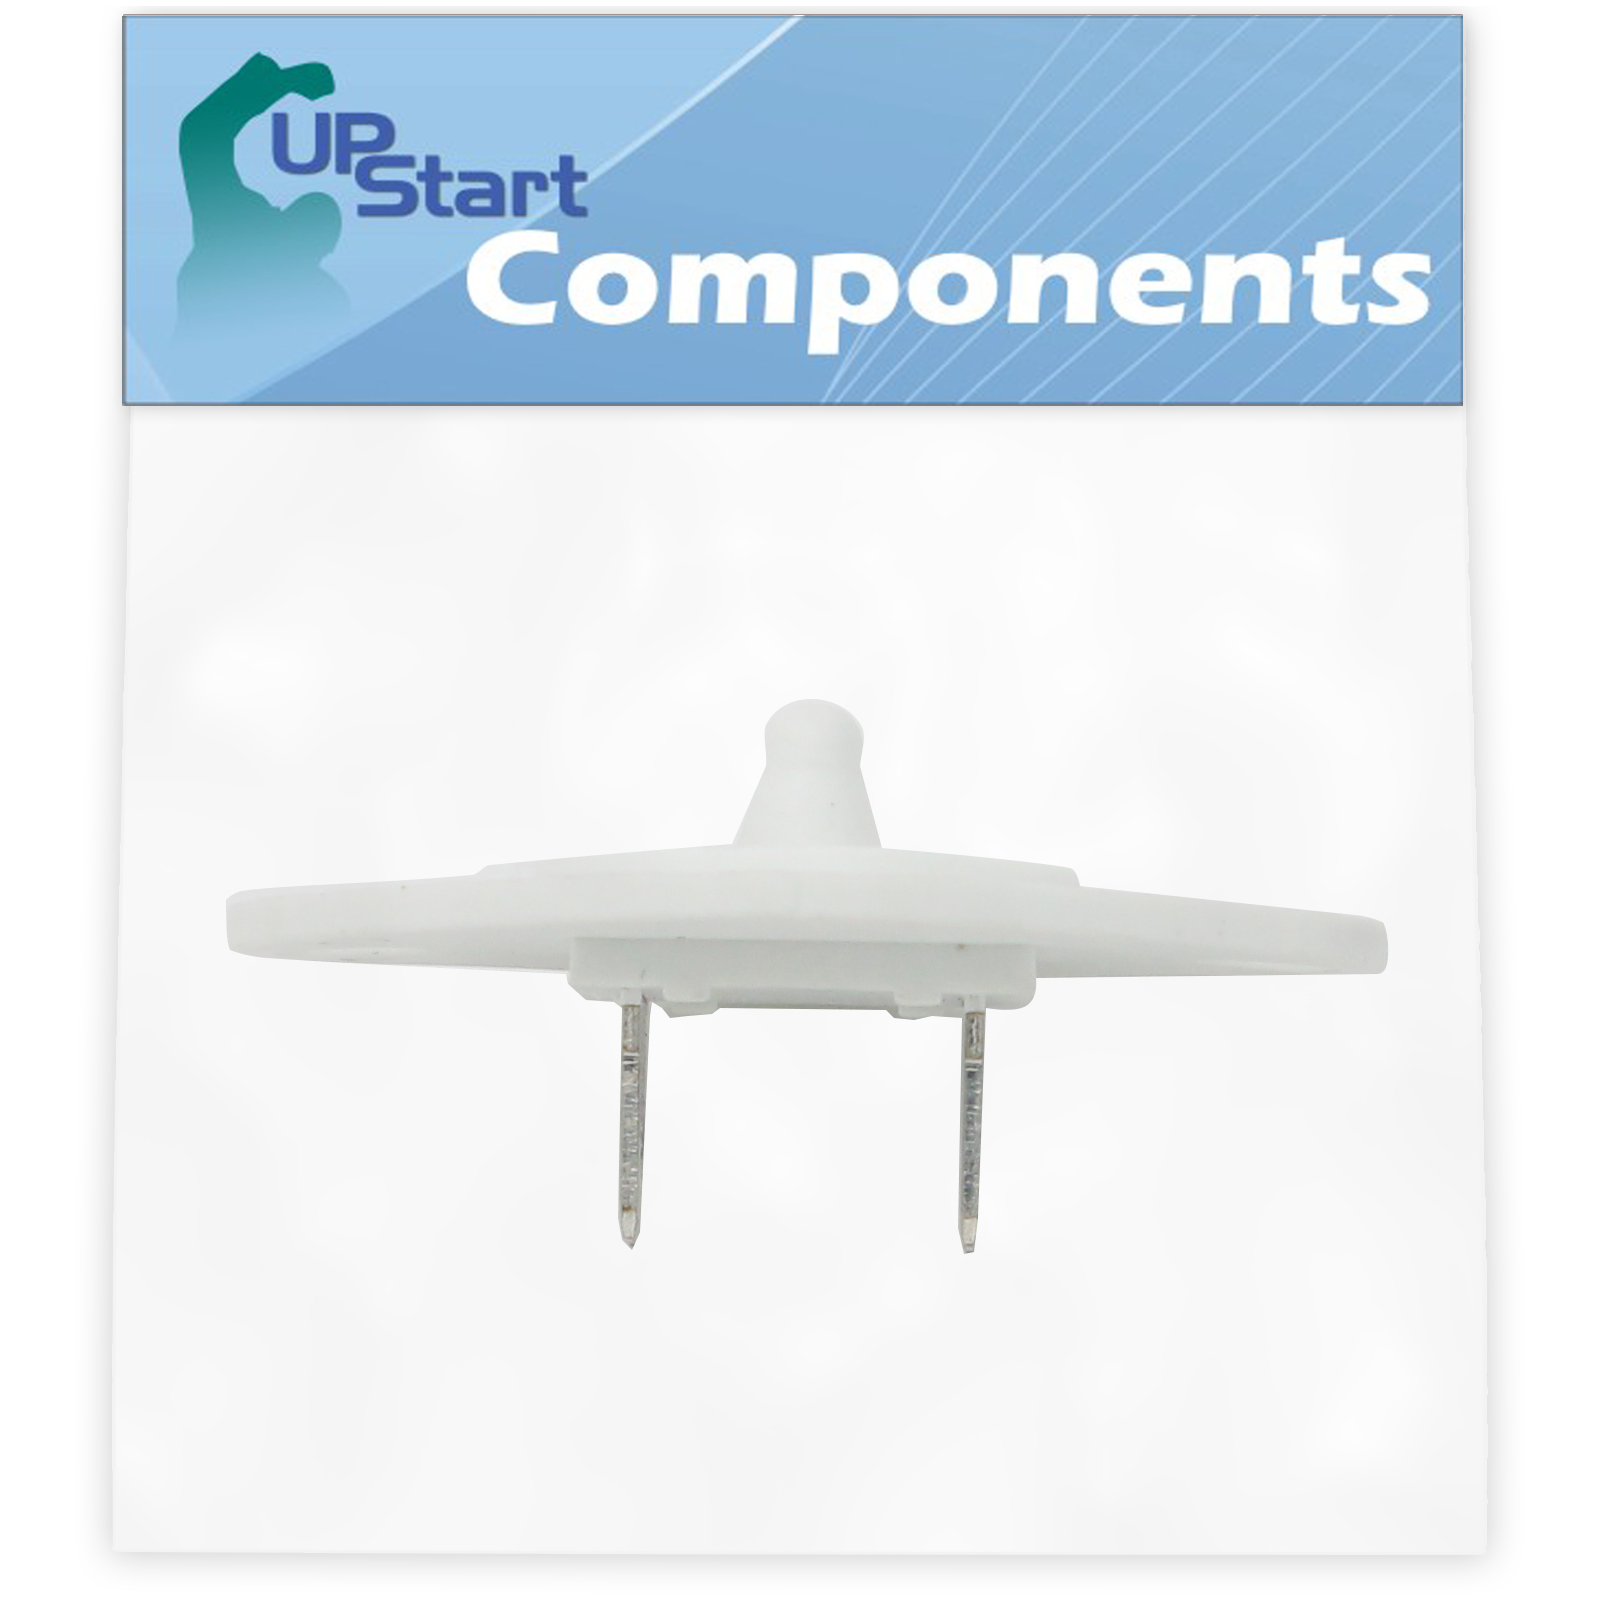 UpStart Components 8577274 Dryer Thermistor Replacement for Whirlpool WP8577274 Dryer